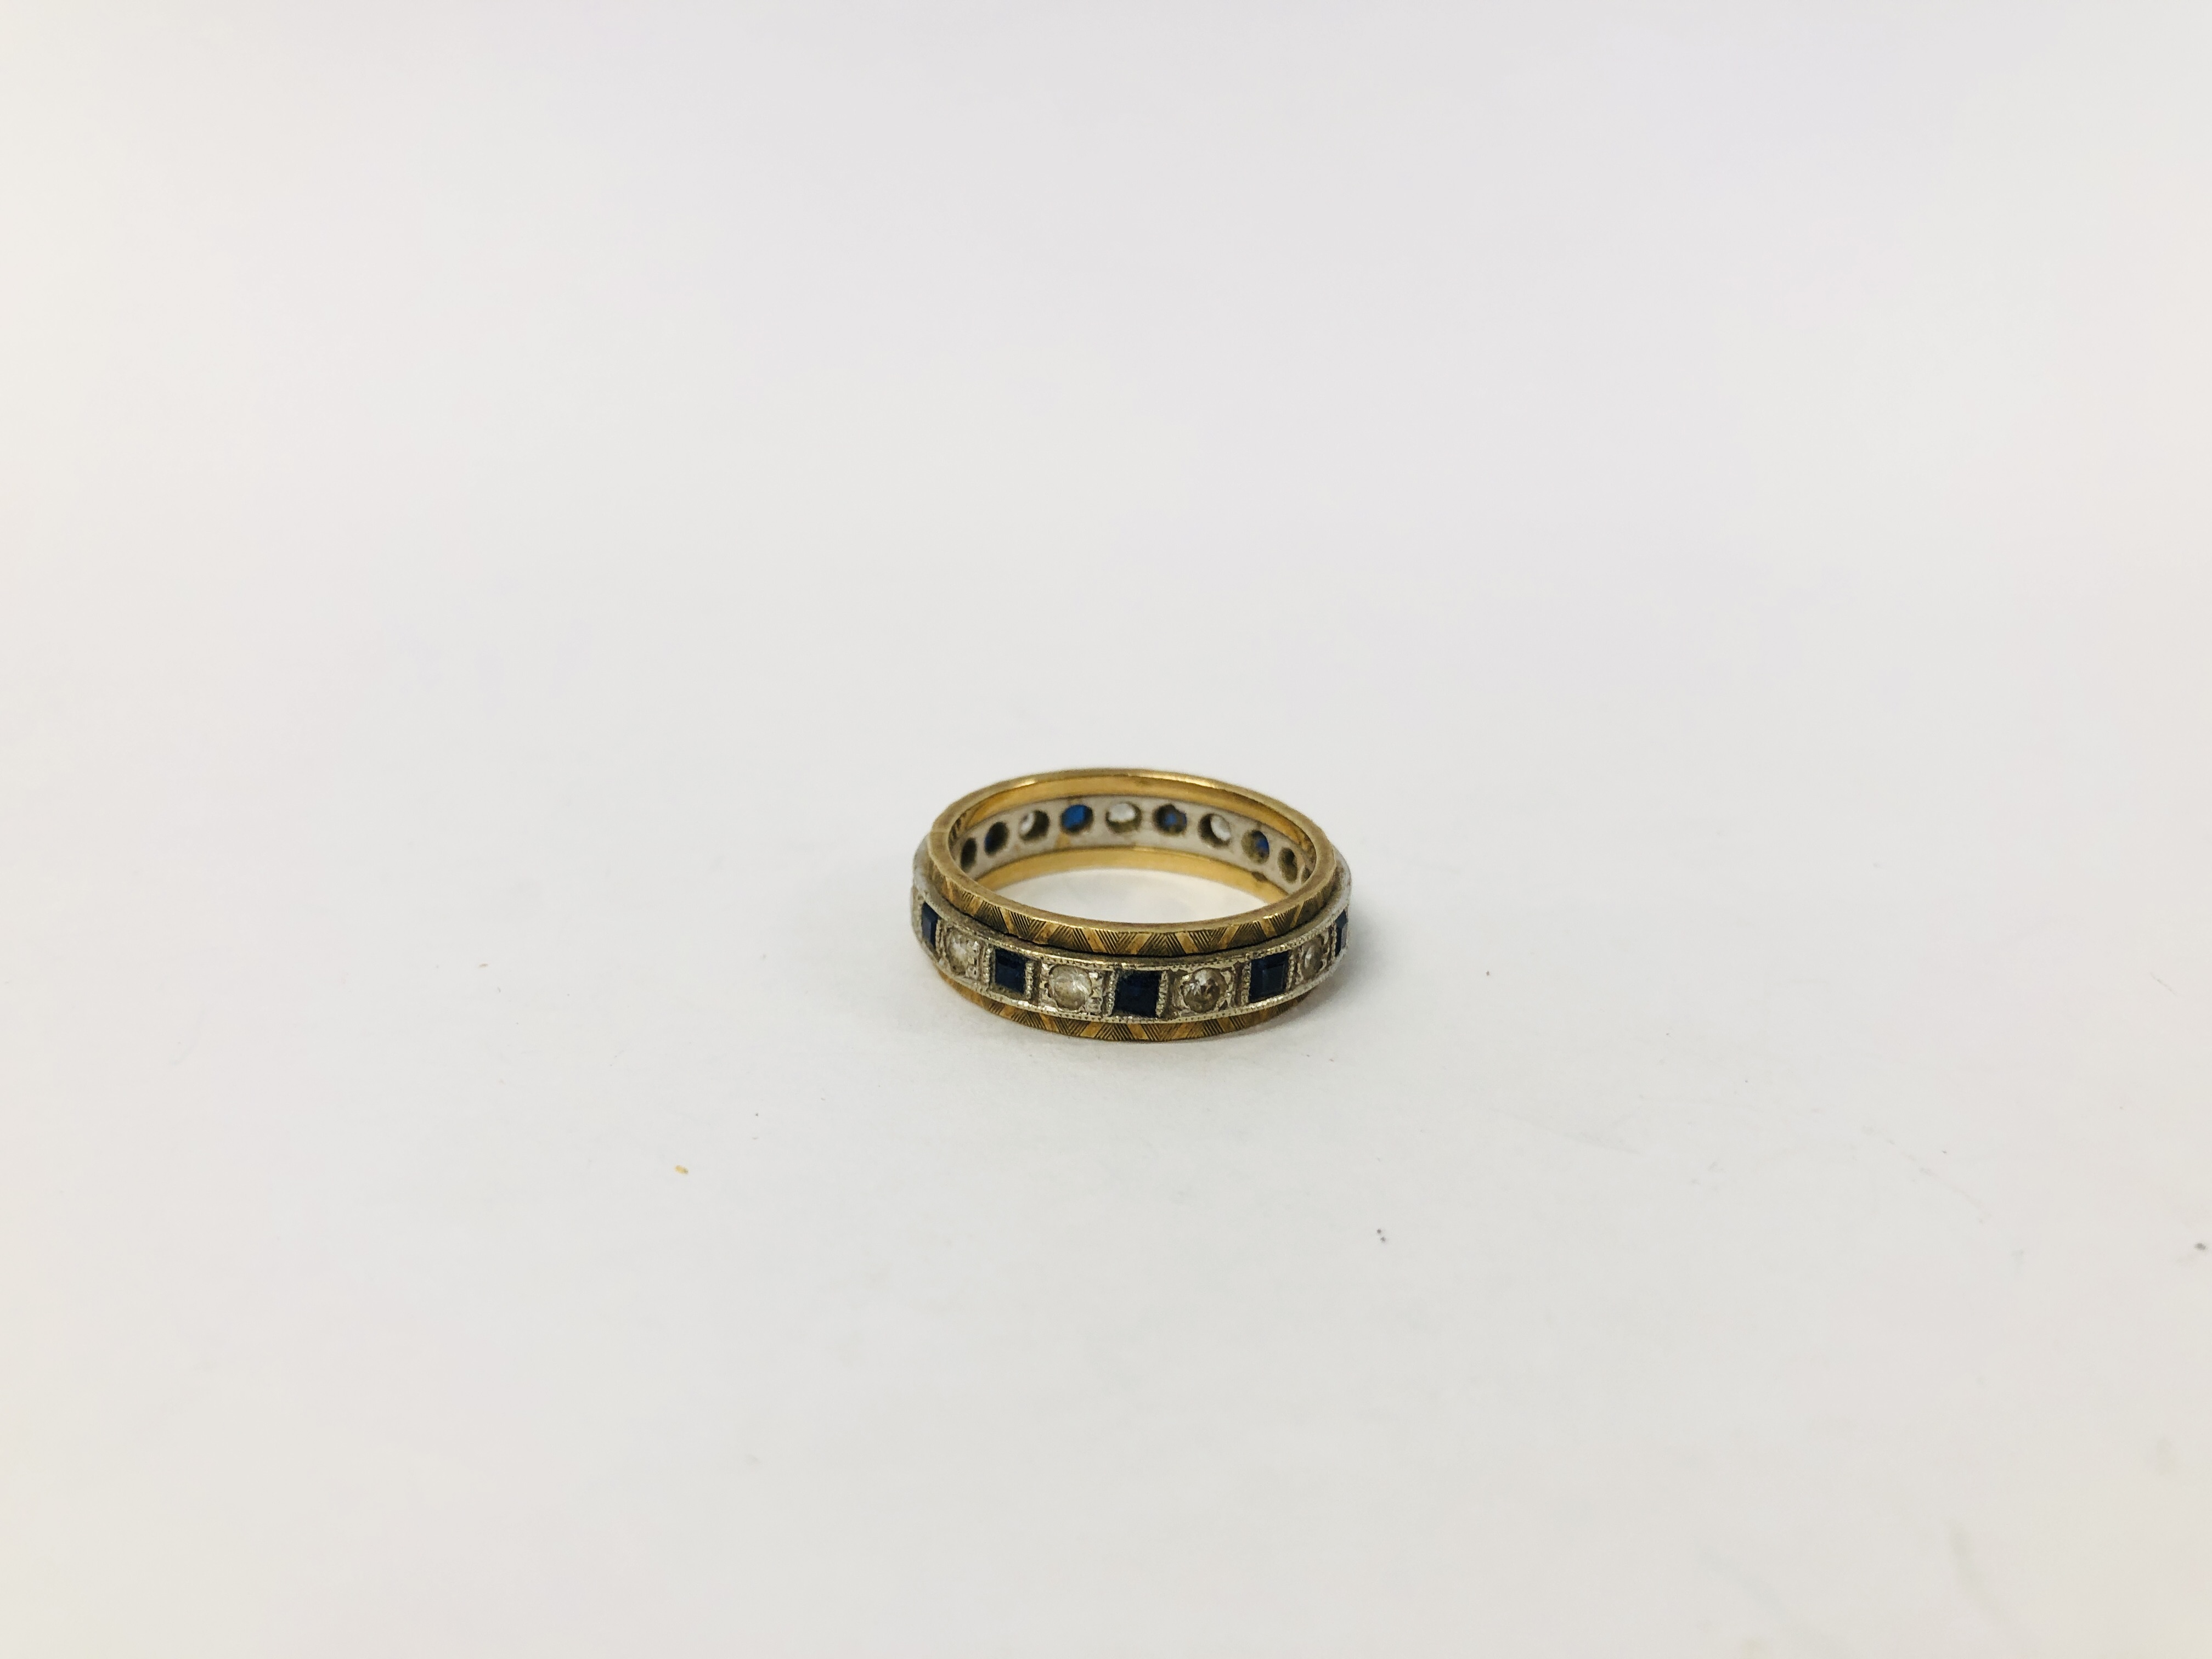 A 9CT. GOLD ETERNITY RING SET WITH ALTERNATE BLUE AND WHITE STONES.